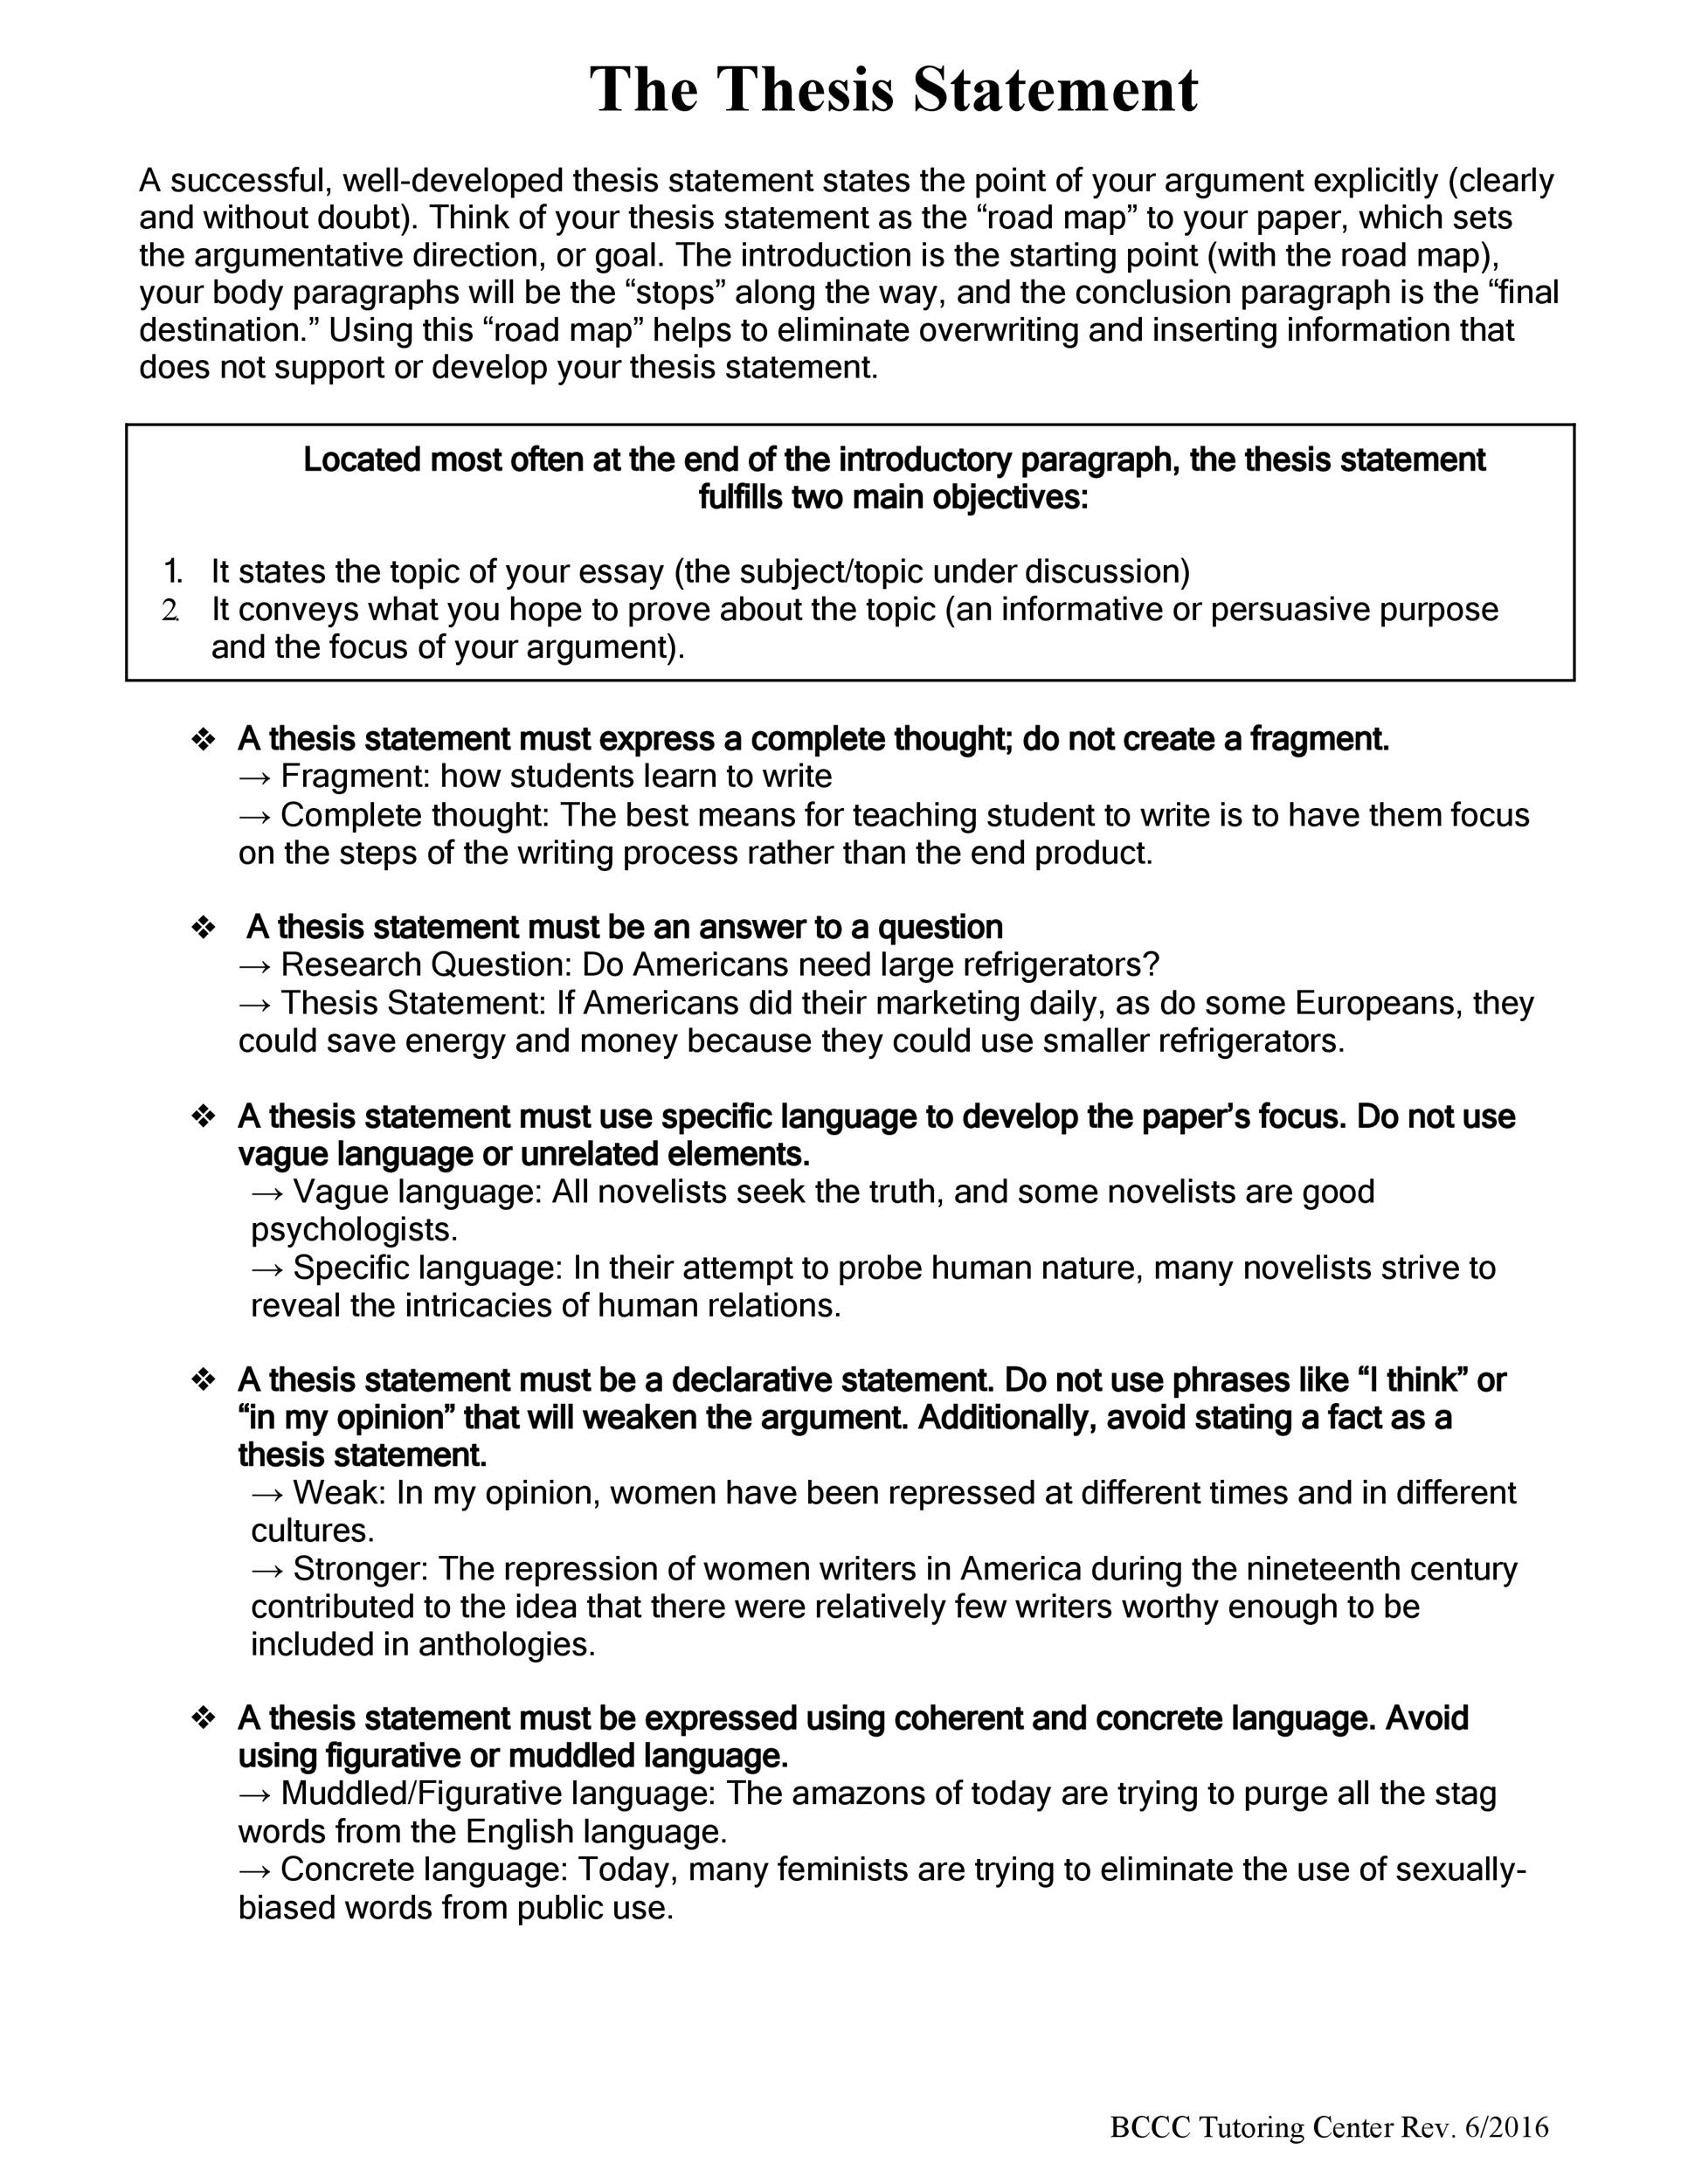 Free thesis statement template 33